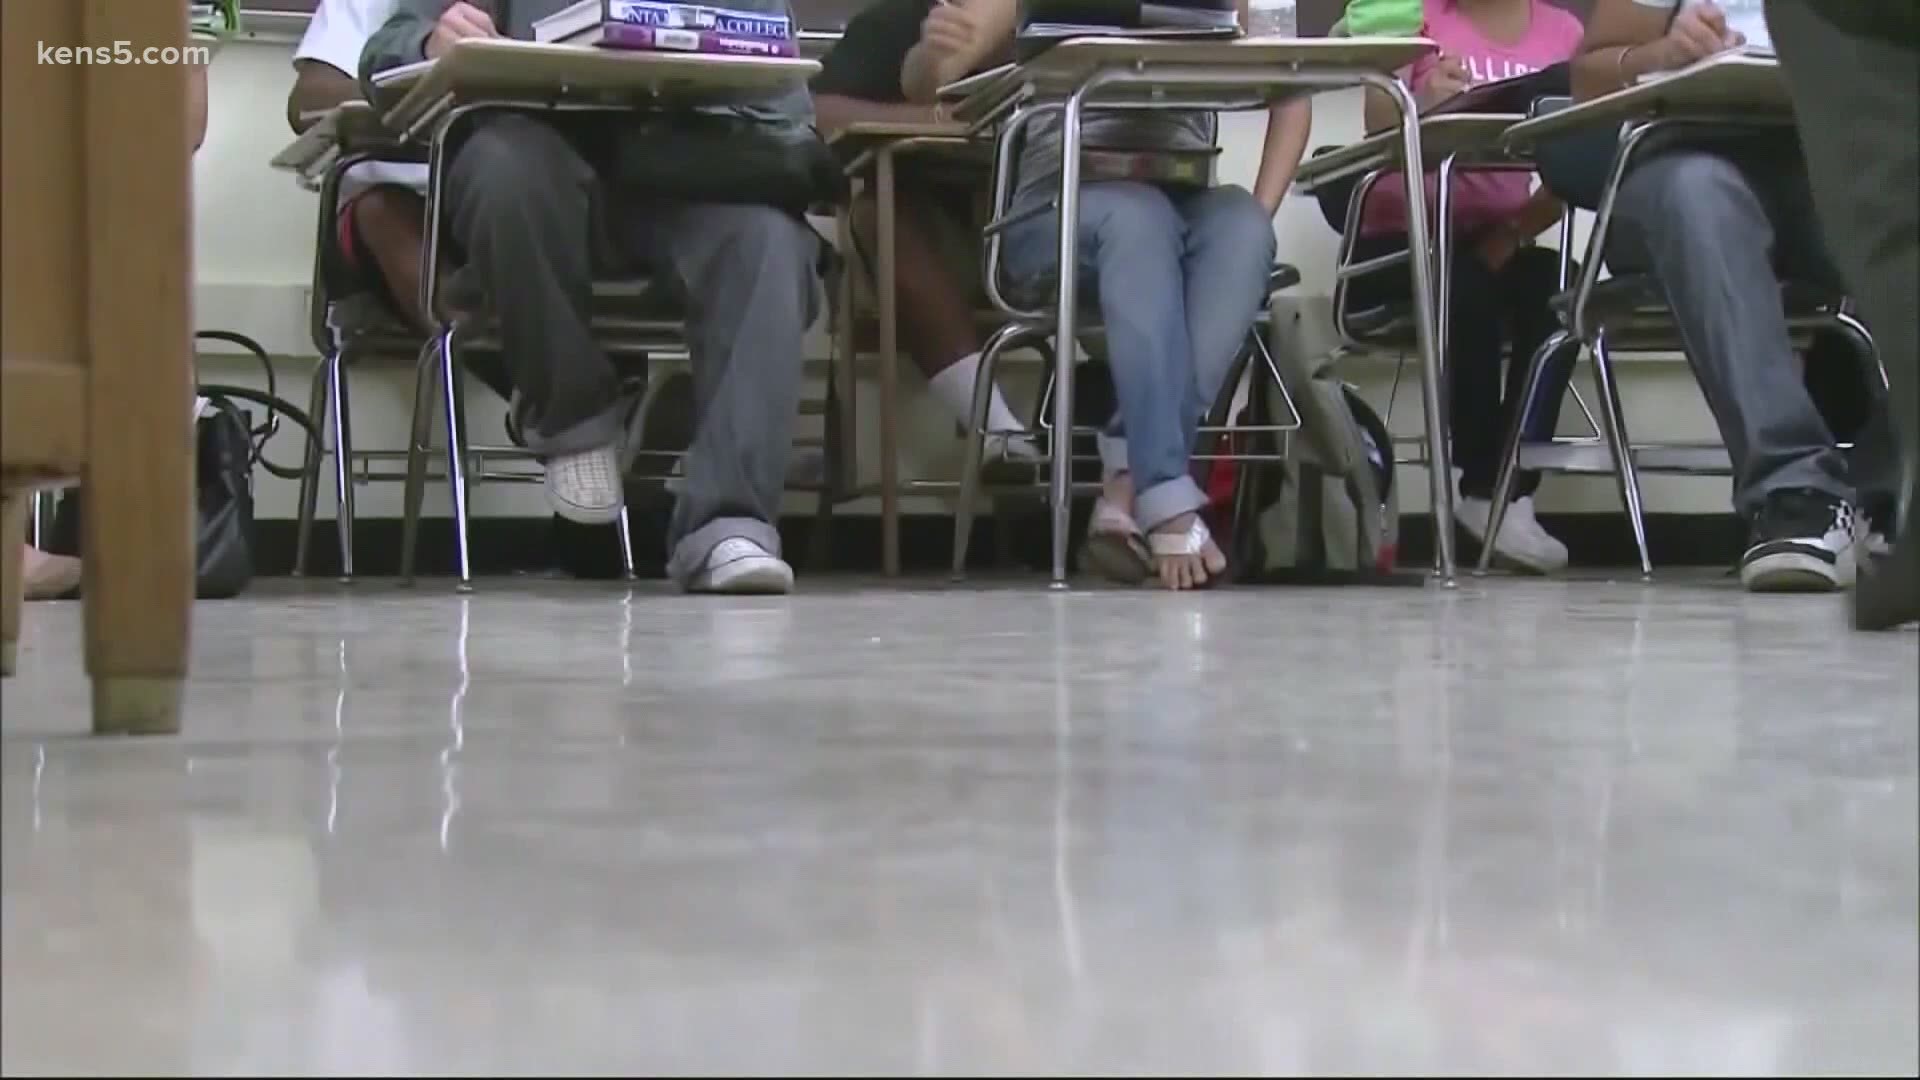 Health leaders said the coronavirus situation is still to severe in the Alamo City for local schools to consider widespread in-person teaching.